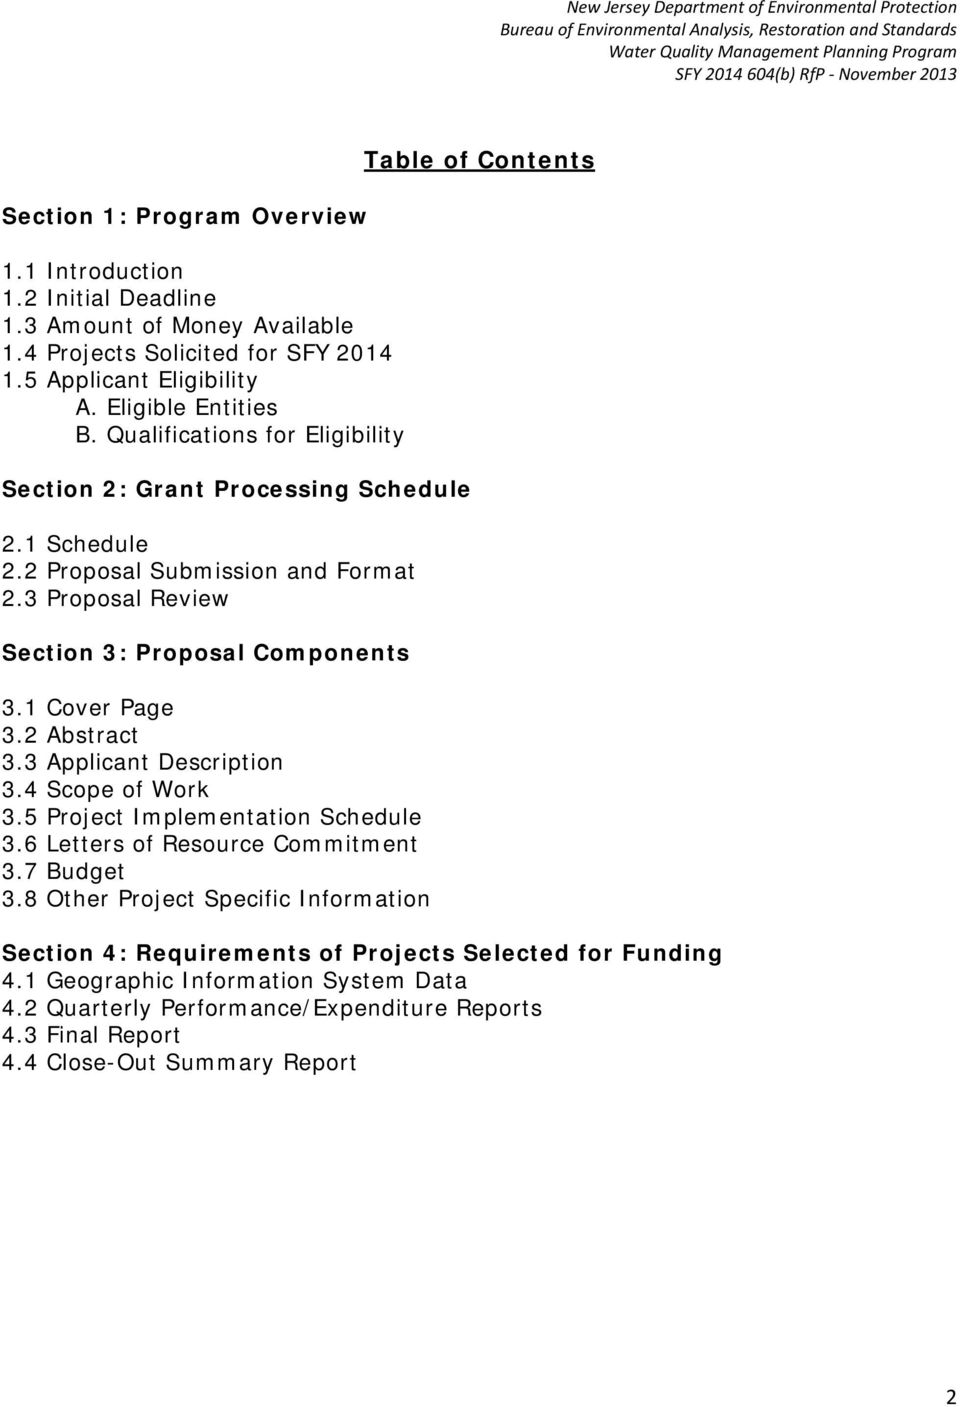 3 Proposal Review Section 3: Proposal Components 3.1 Cover Page 3.2 Abstract 3.3 Applicant Description 3.4 Scope of Work 3.5 Project Implementation Schedule 3.6 Letters of Resource Commitment 3.